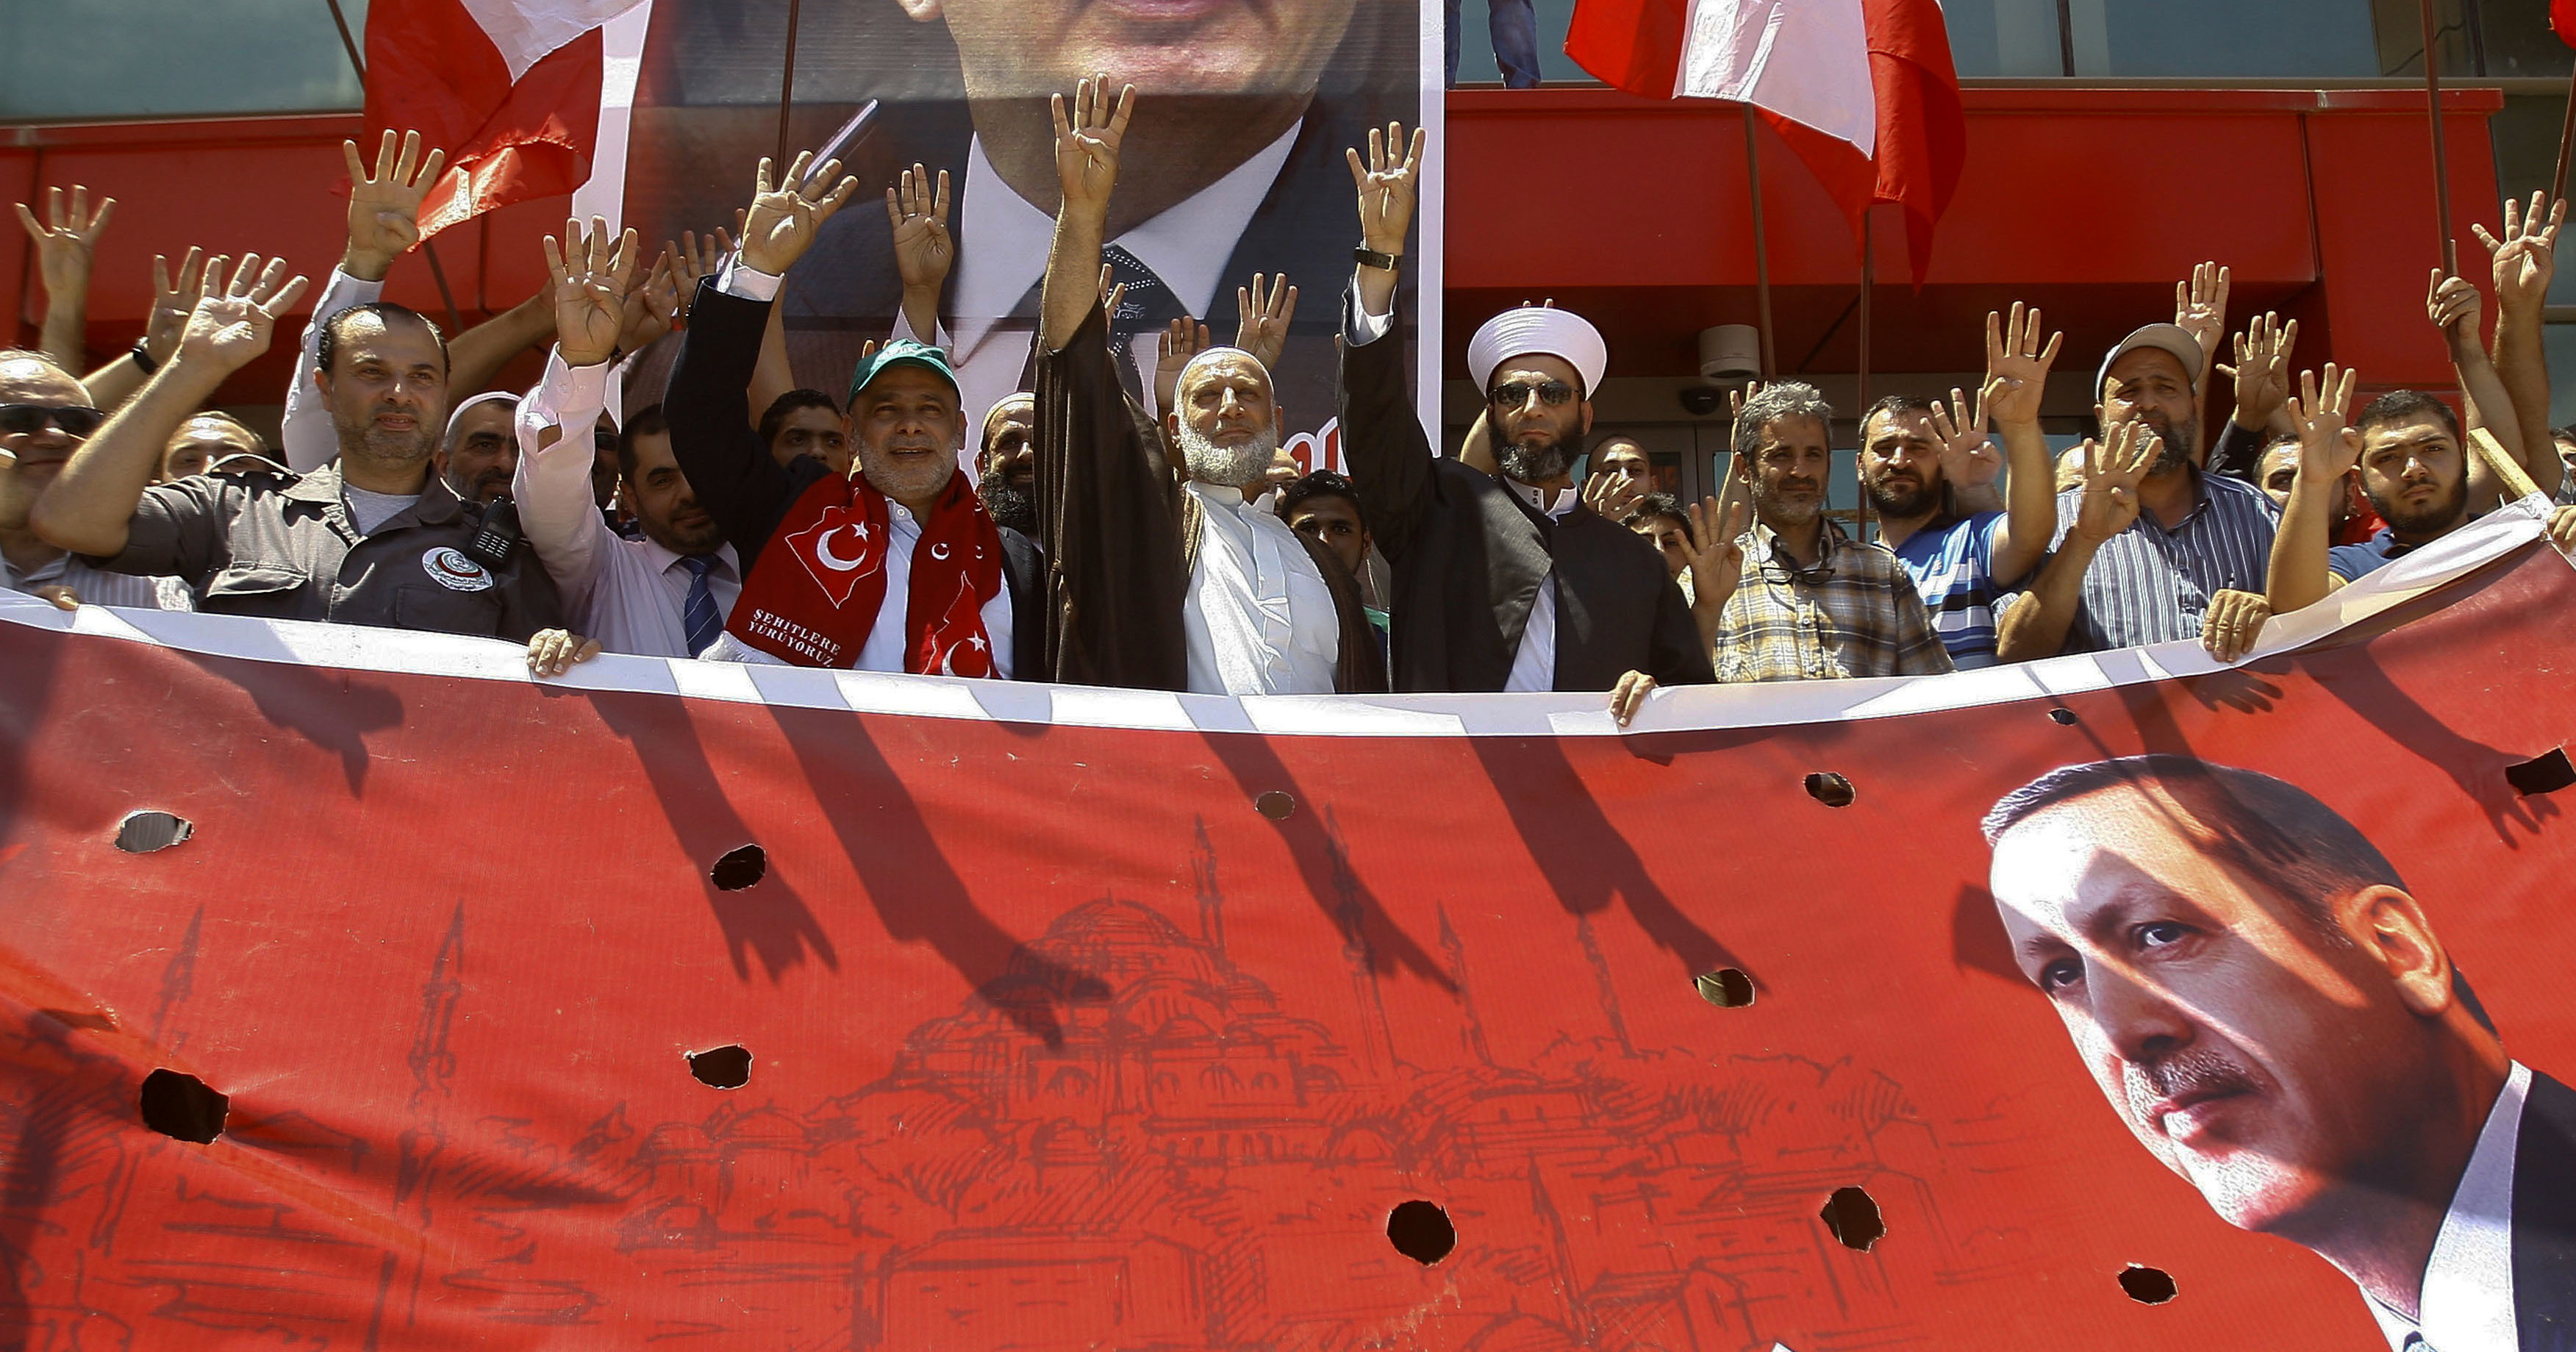 Supporters of Turkey's President Recep Tayyip Erdogan, making a four-fingered gesture referring to the 2013 killing of Muslim Brotherhood protesters at the Rabaah Al-Adawiya Mosque in Egypt, protest against the failed coup in Turkey, in front the Turkish hospital in the southern port city of Sidon, Lebanon, July 16, 2016. (AP/Mohammed Zaatari)